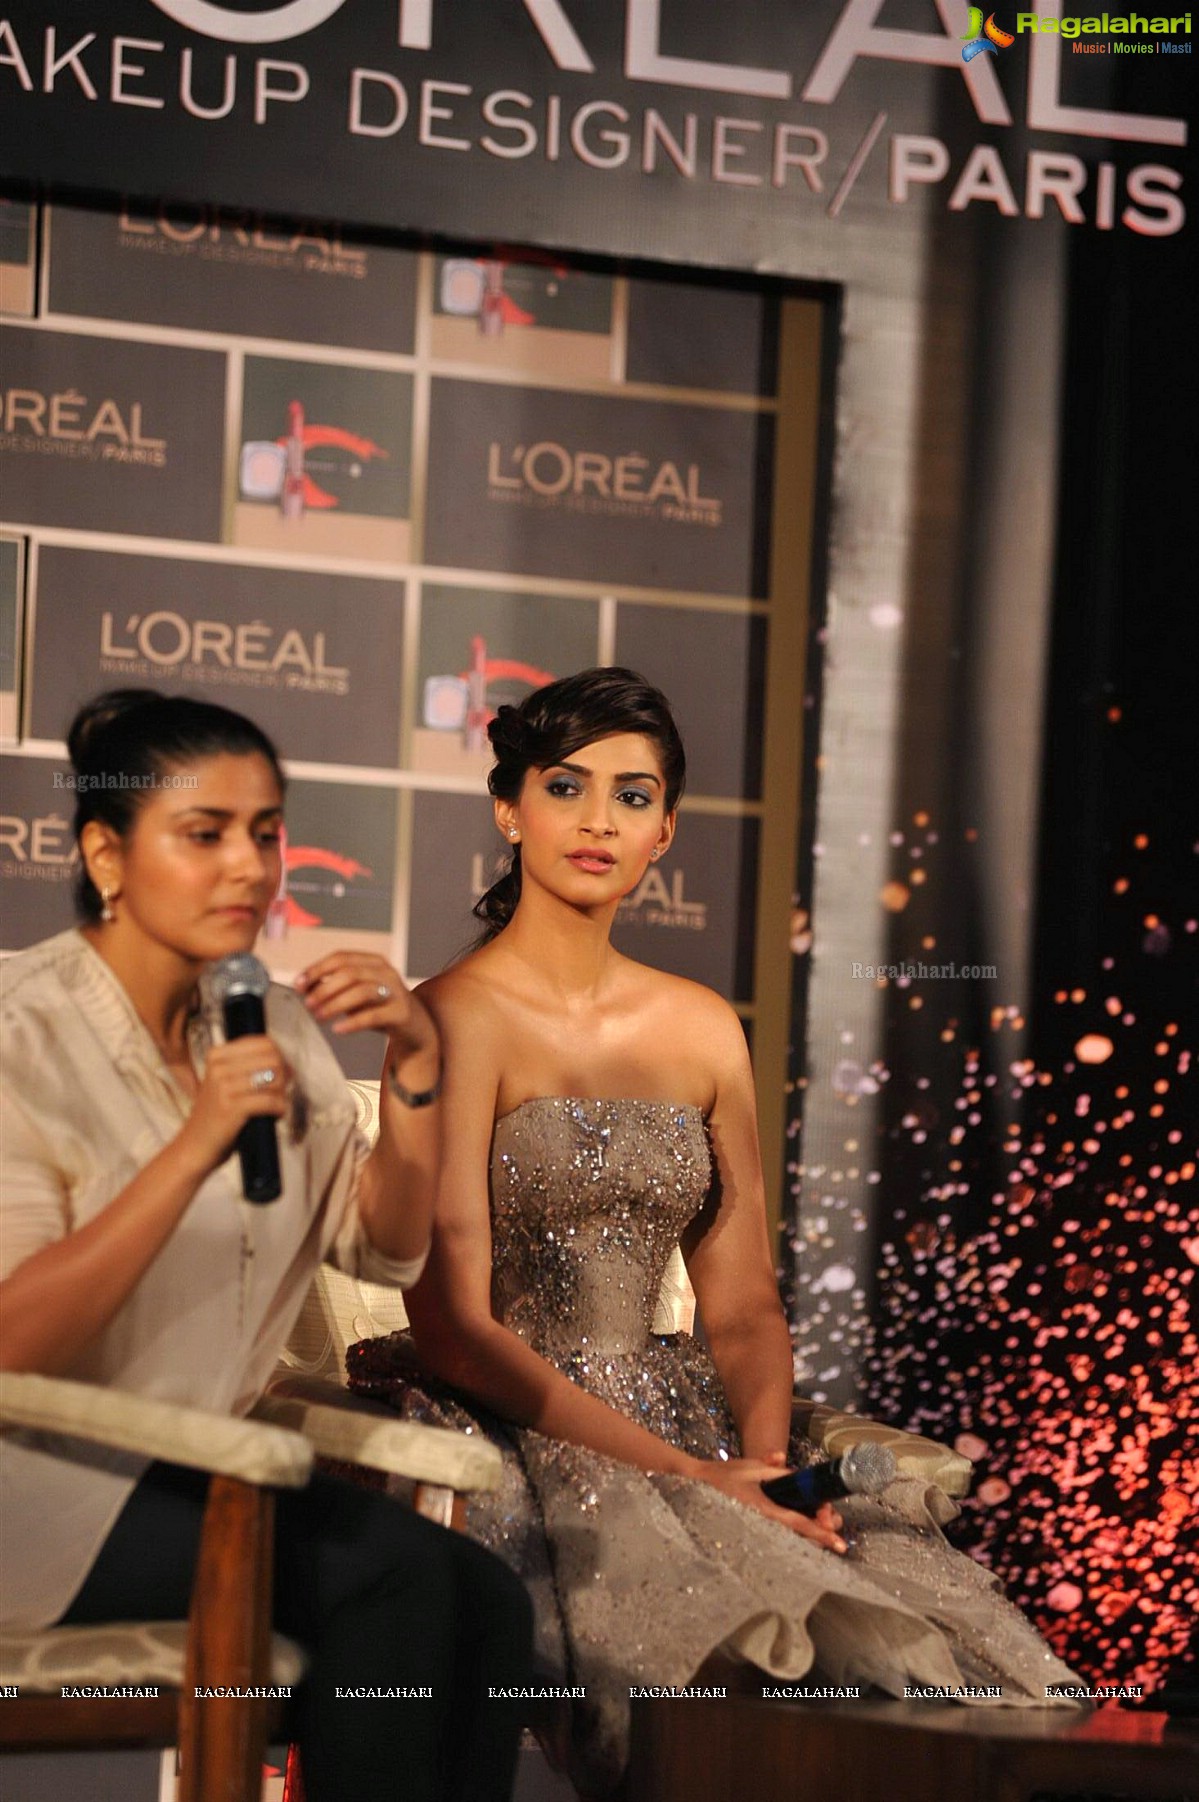 Sonam Kapoor unveils of L’Oreal Paris Make Up Collection for Cannes 2014